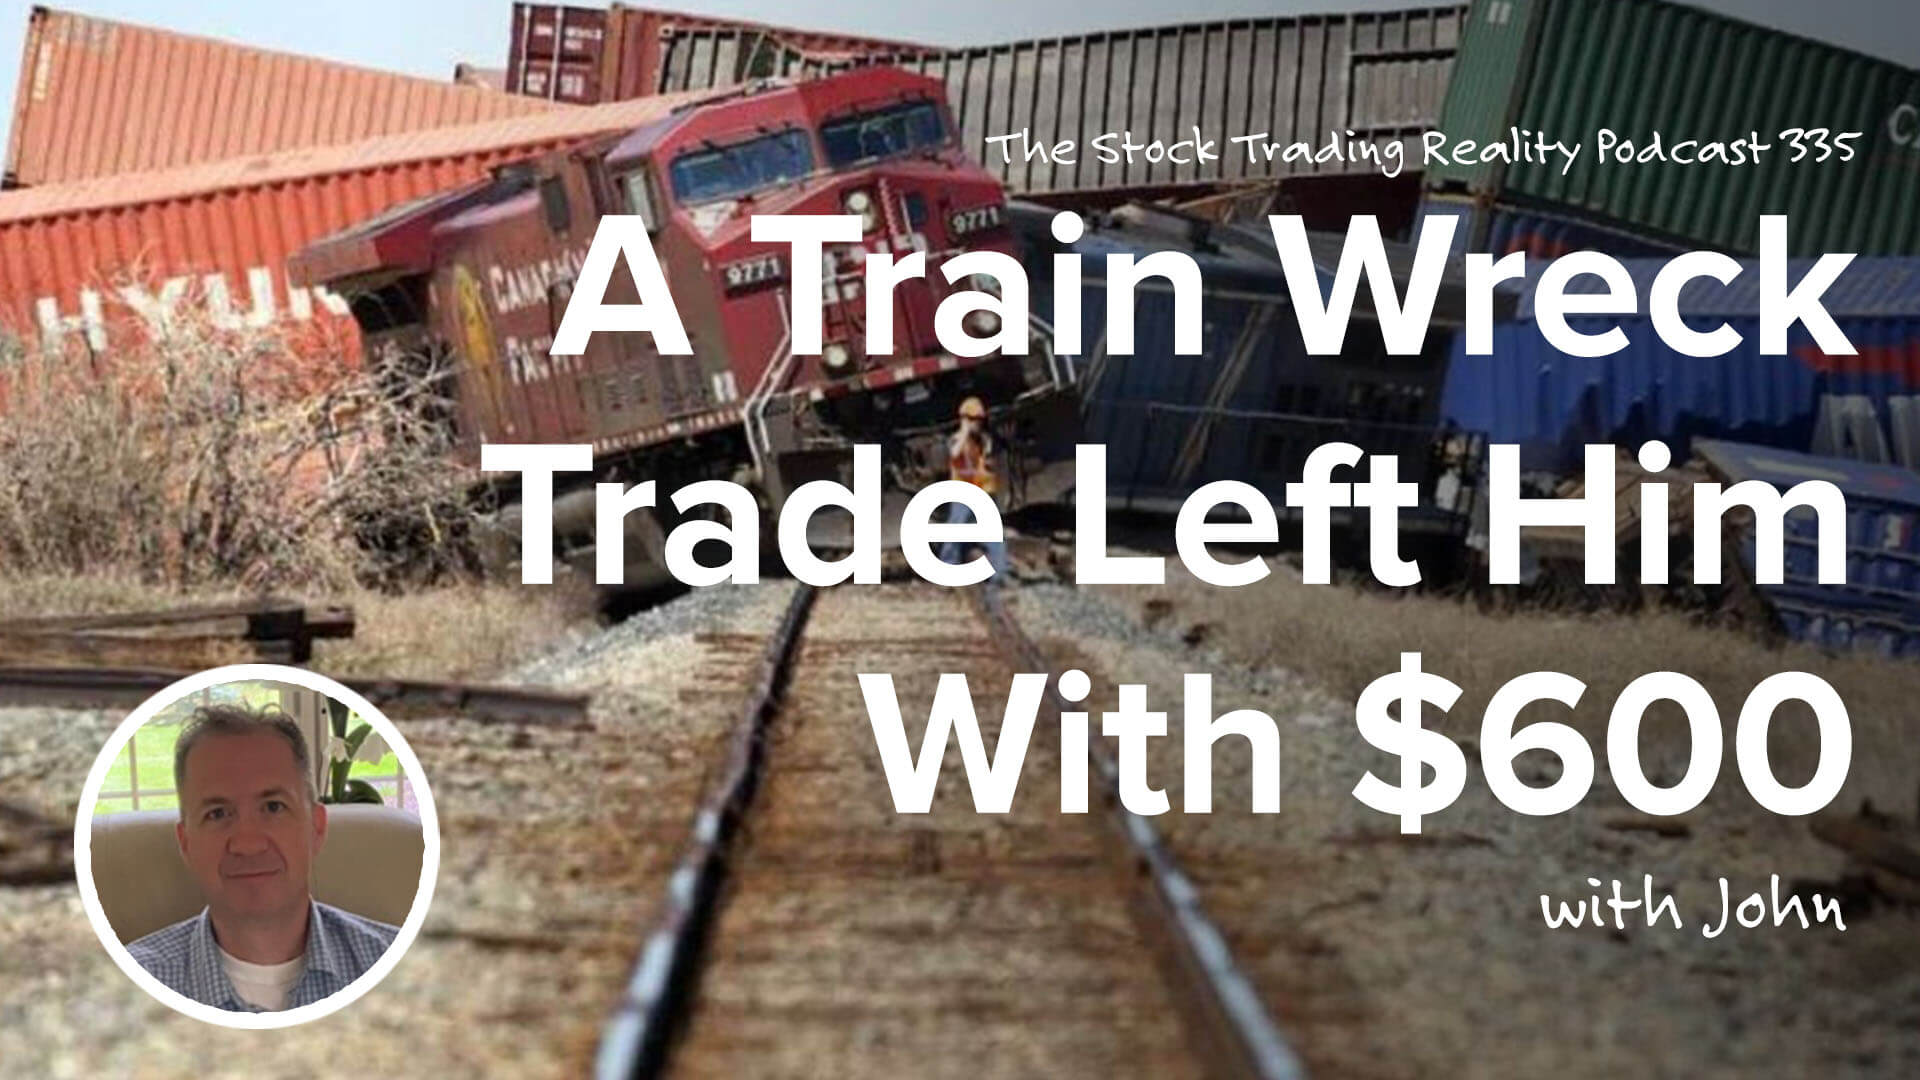 A Train Wreck Trade Left Him With Only $600... Then What? | STR 335